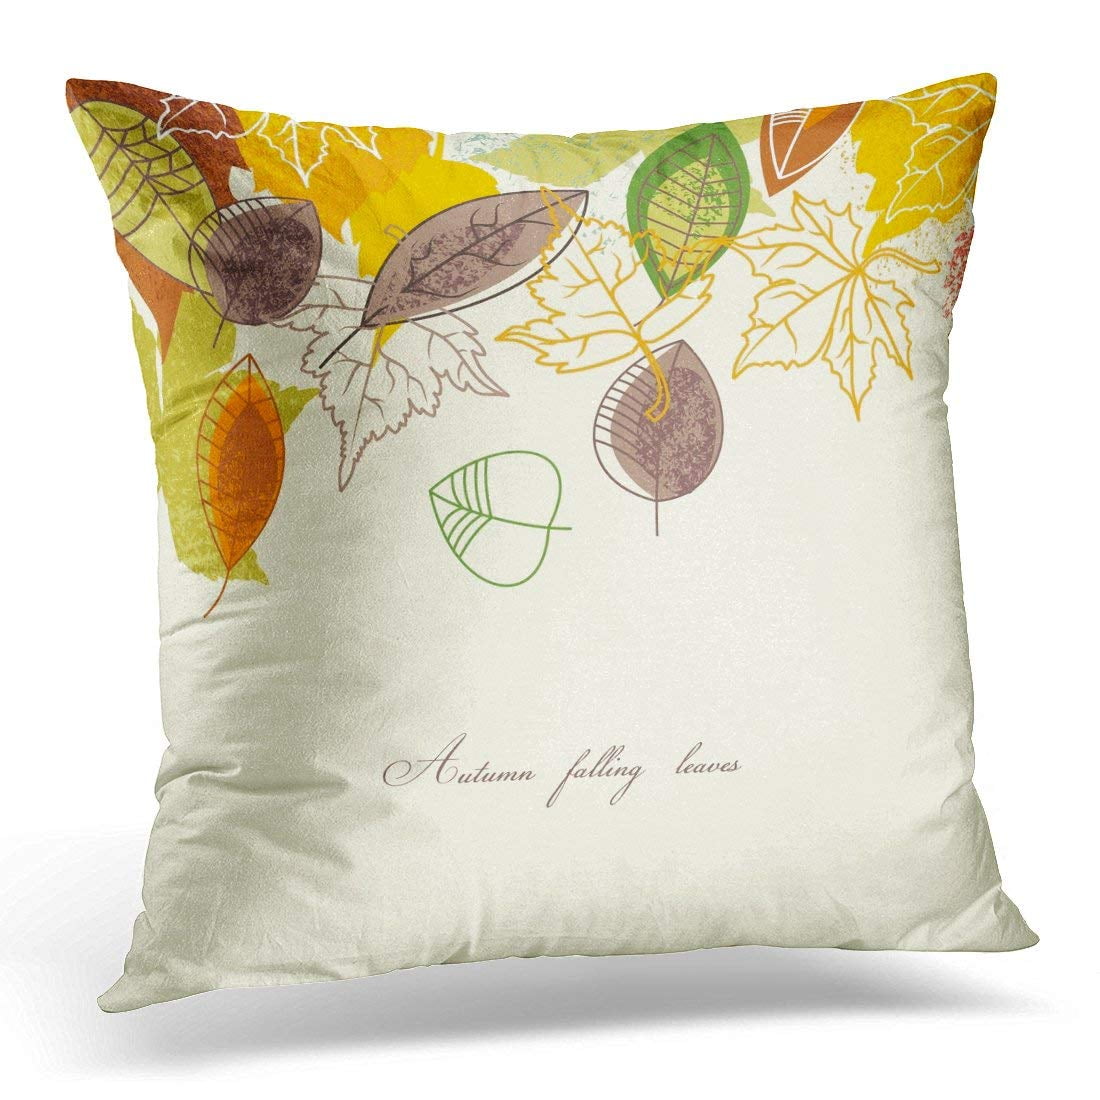 ARHOME Yellow Fall Autumn Falling Leaves Green Leaf Throw Pillow Case Pillow Cover Sofa Home